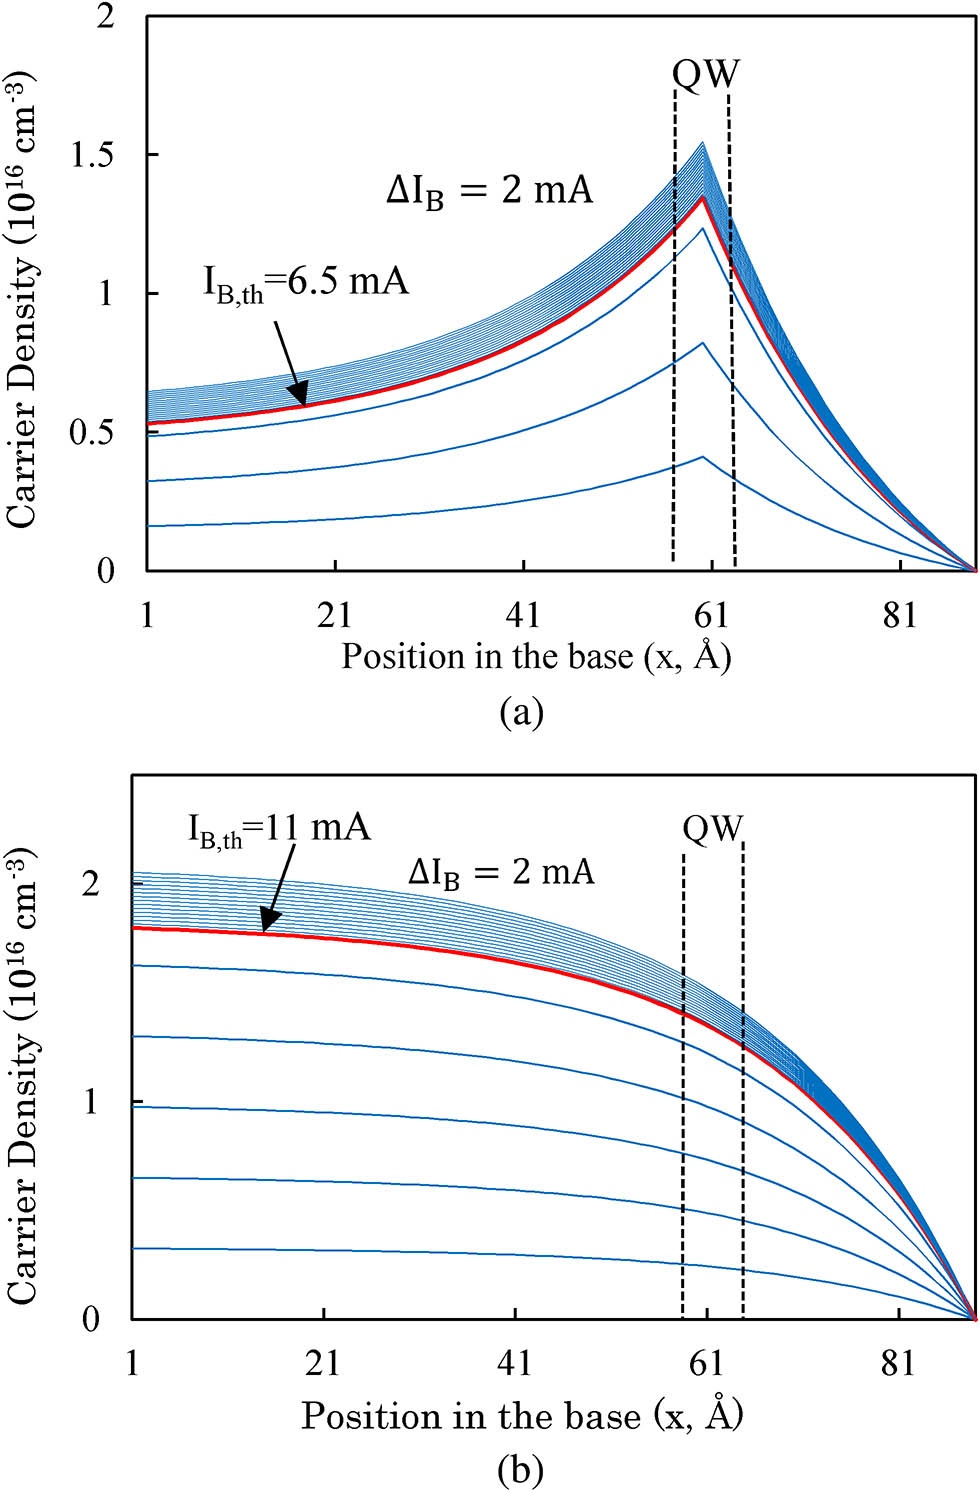 Calculated minority electron distribution for (a) the first proposed GRIN-SCH structure and (b) the second proposed GRIN-SCH structure. (a) is in good agreement with the calculated carrier population for the GRIN-SCH QW laser[14], and (b) also complies with the results of graded base HBTs[4].